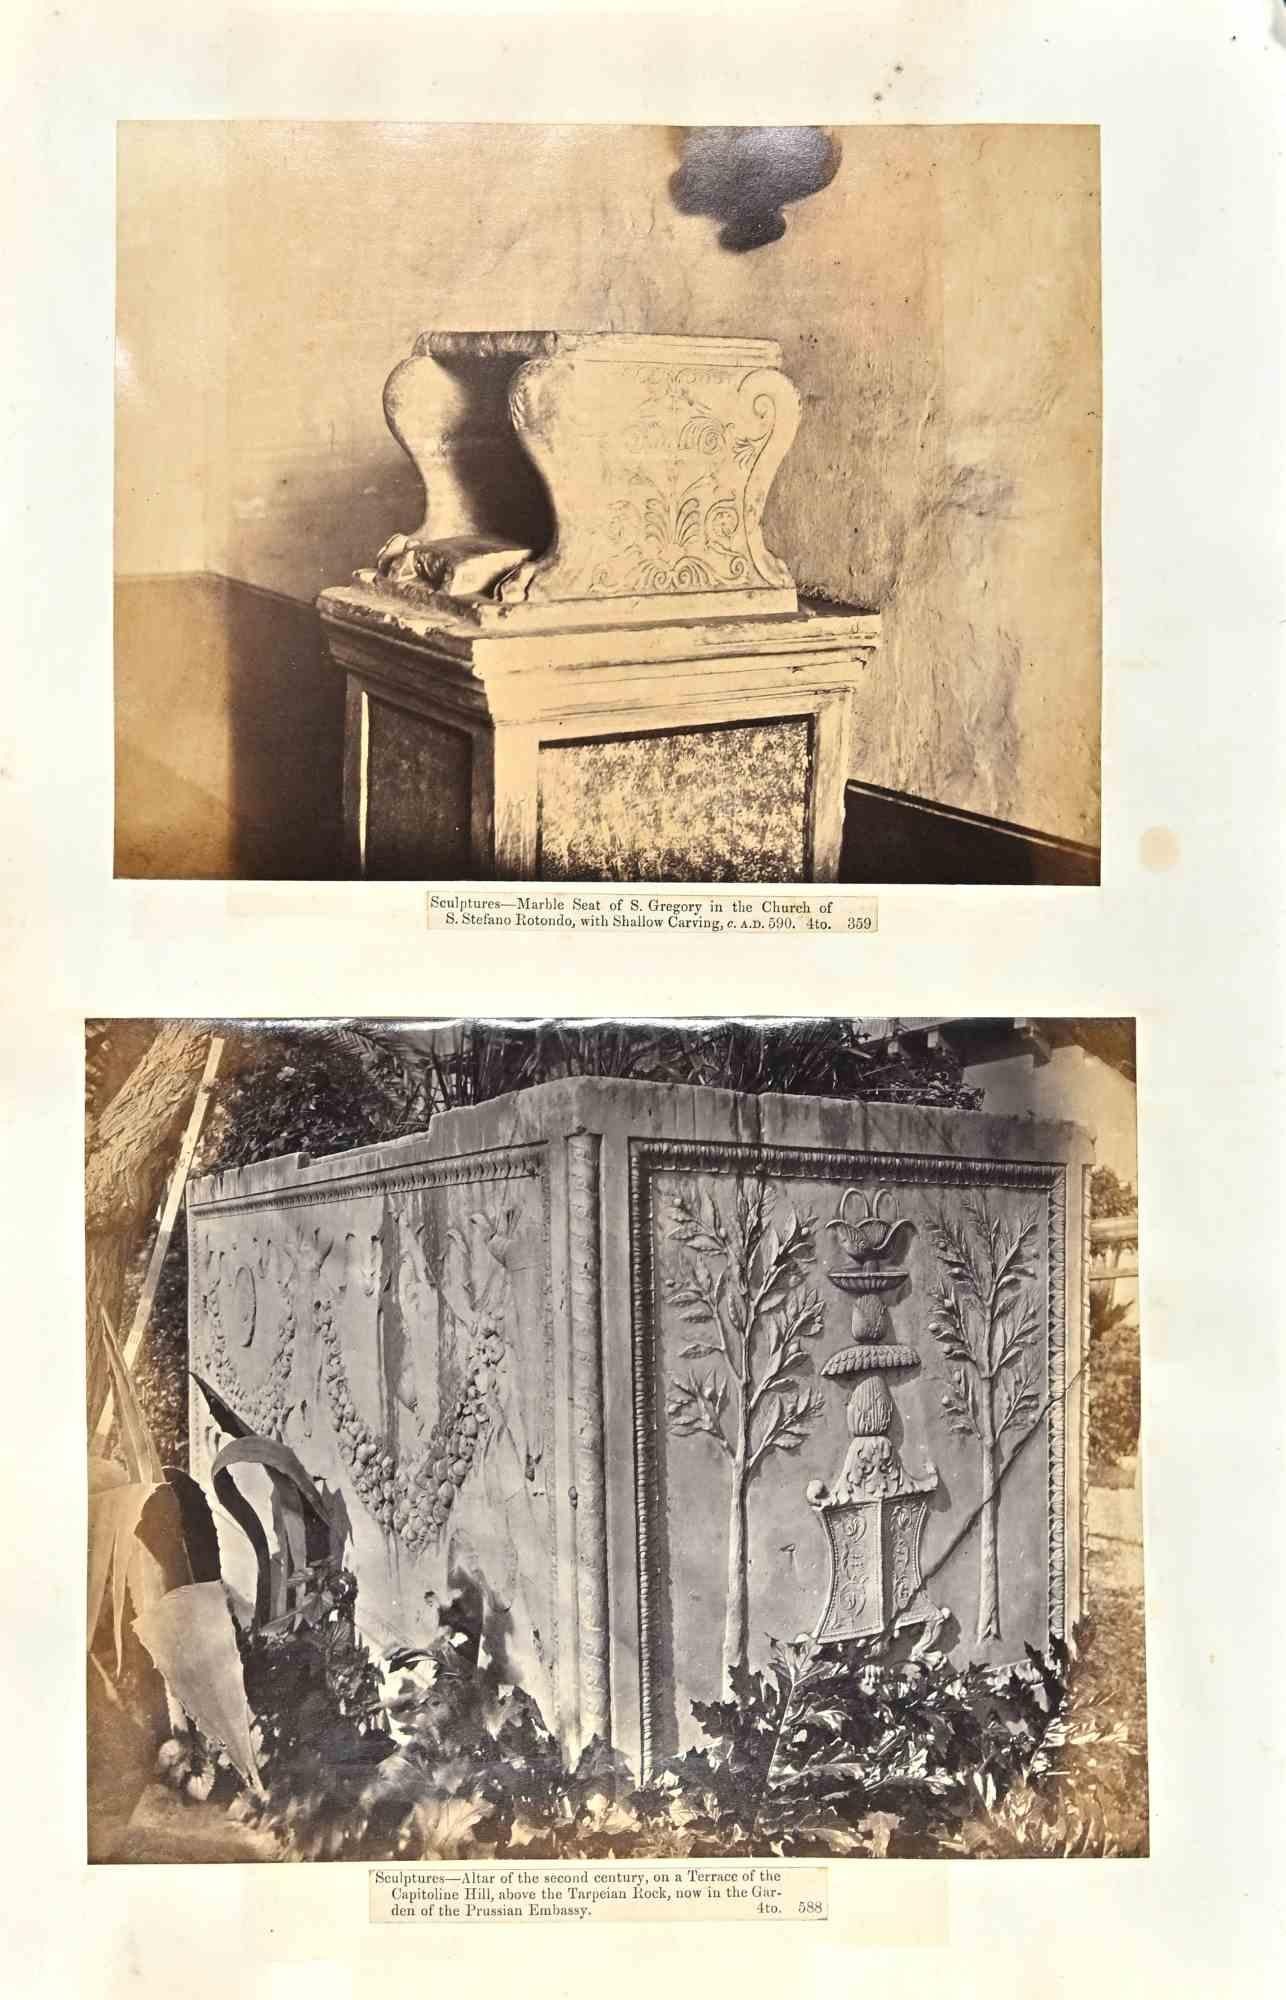 View Of Rome - Vintage Photograph is a Vintage Photograph in the early 20th Century.

Four photographs, two on the front and two on the rear: Sculptures of the first century, tombs.

Good condition and aged margins.

The artwork belongs to a series